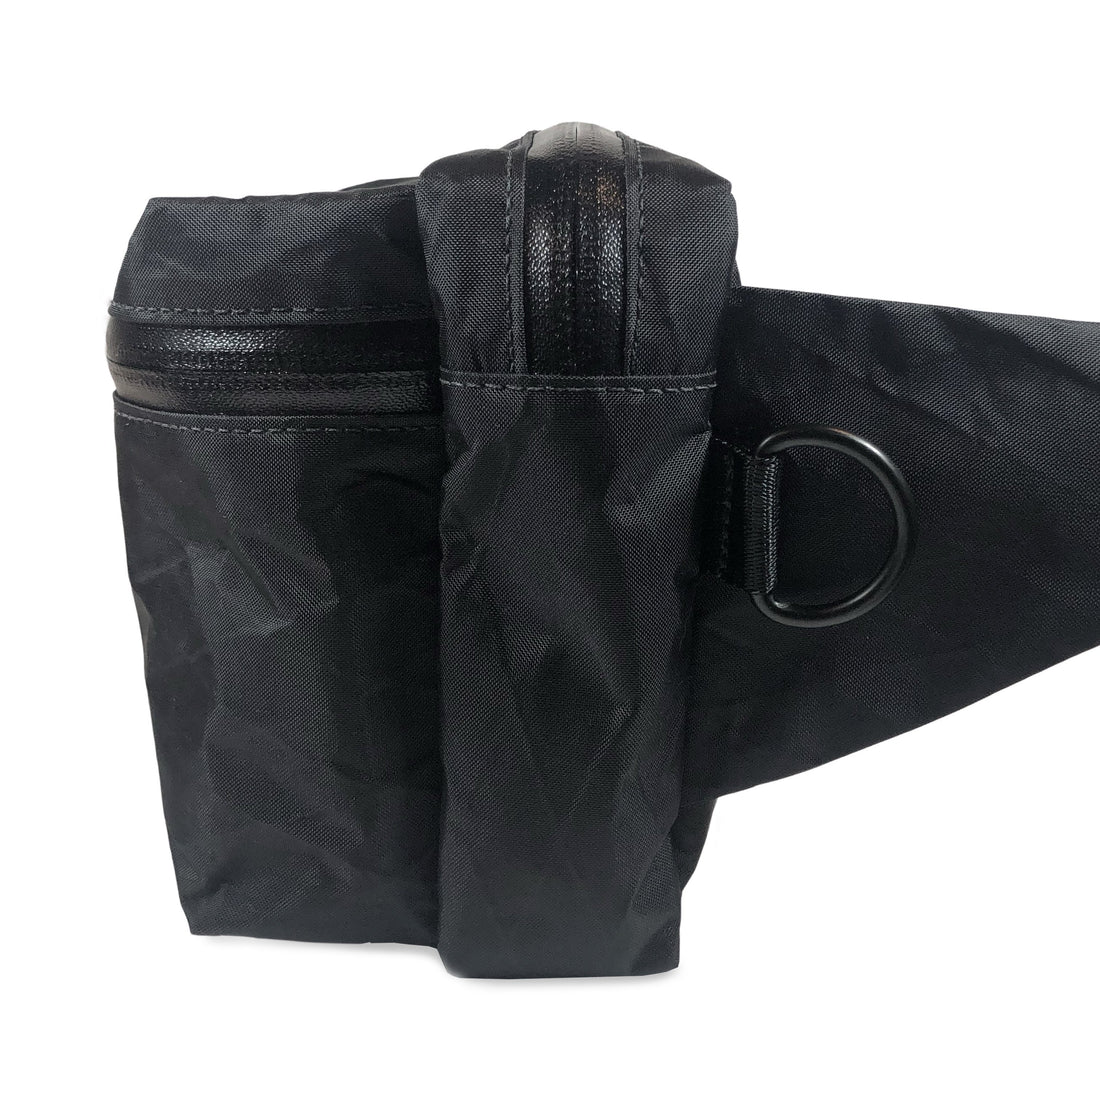 Black Horween Leather Hip Pouch no.2